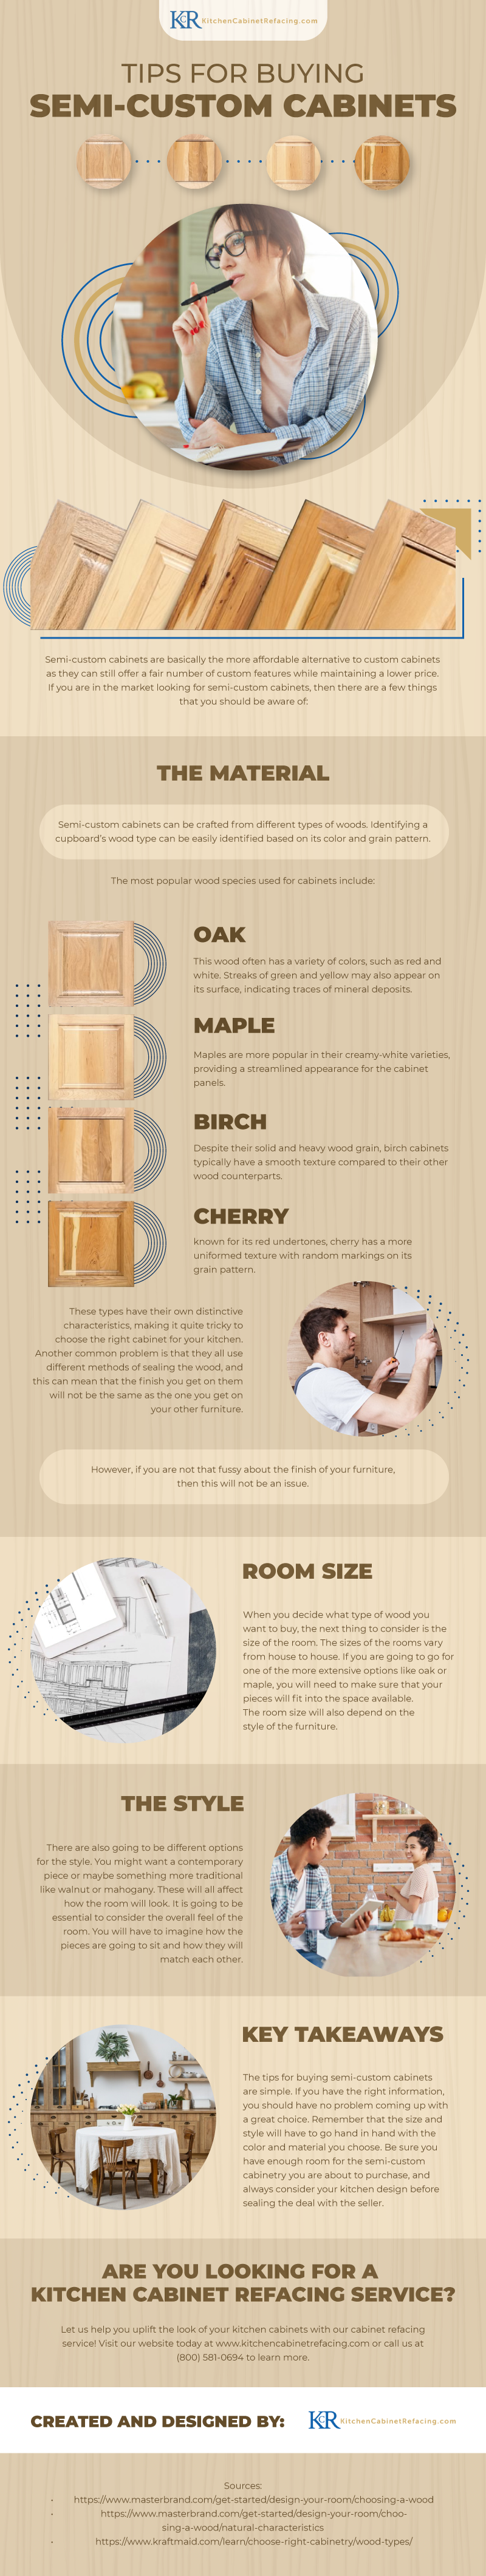 Tips_for_Buying_Semi_Custom_Cabinets_infographic